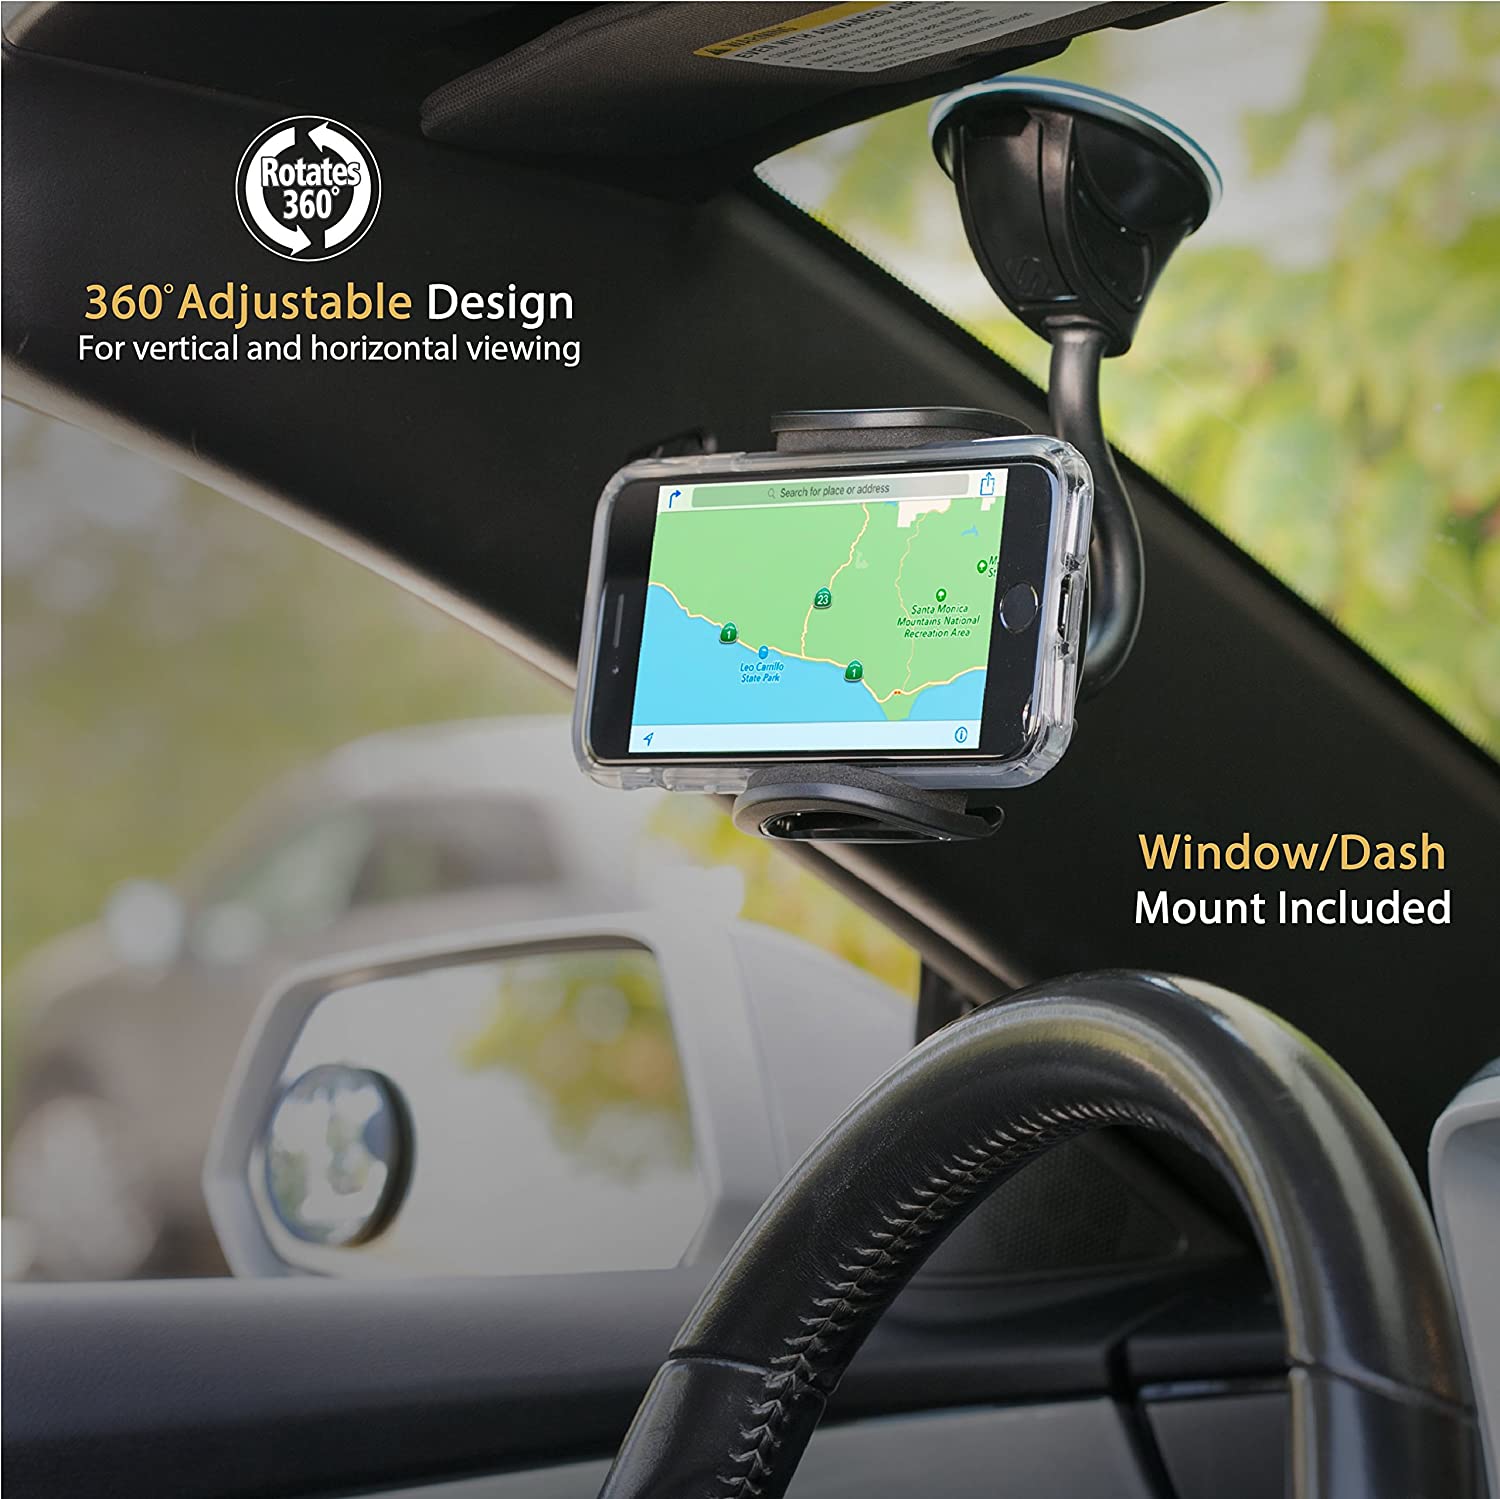 Scosche Car Mount Kit, Mount for Dash, Vent, or Windshield, Bar Grip Suction Cup Base, Non-Magnetic, Black 4-in-1